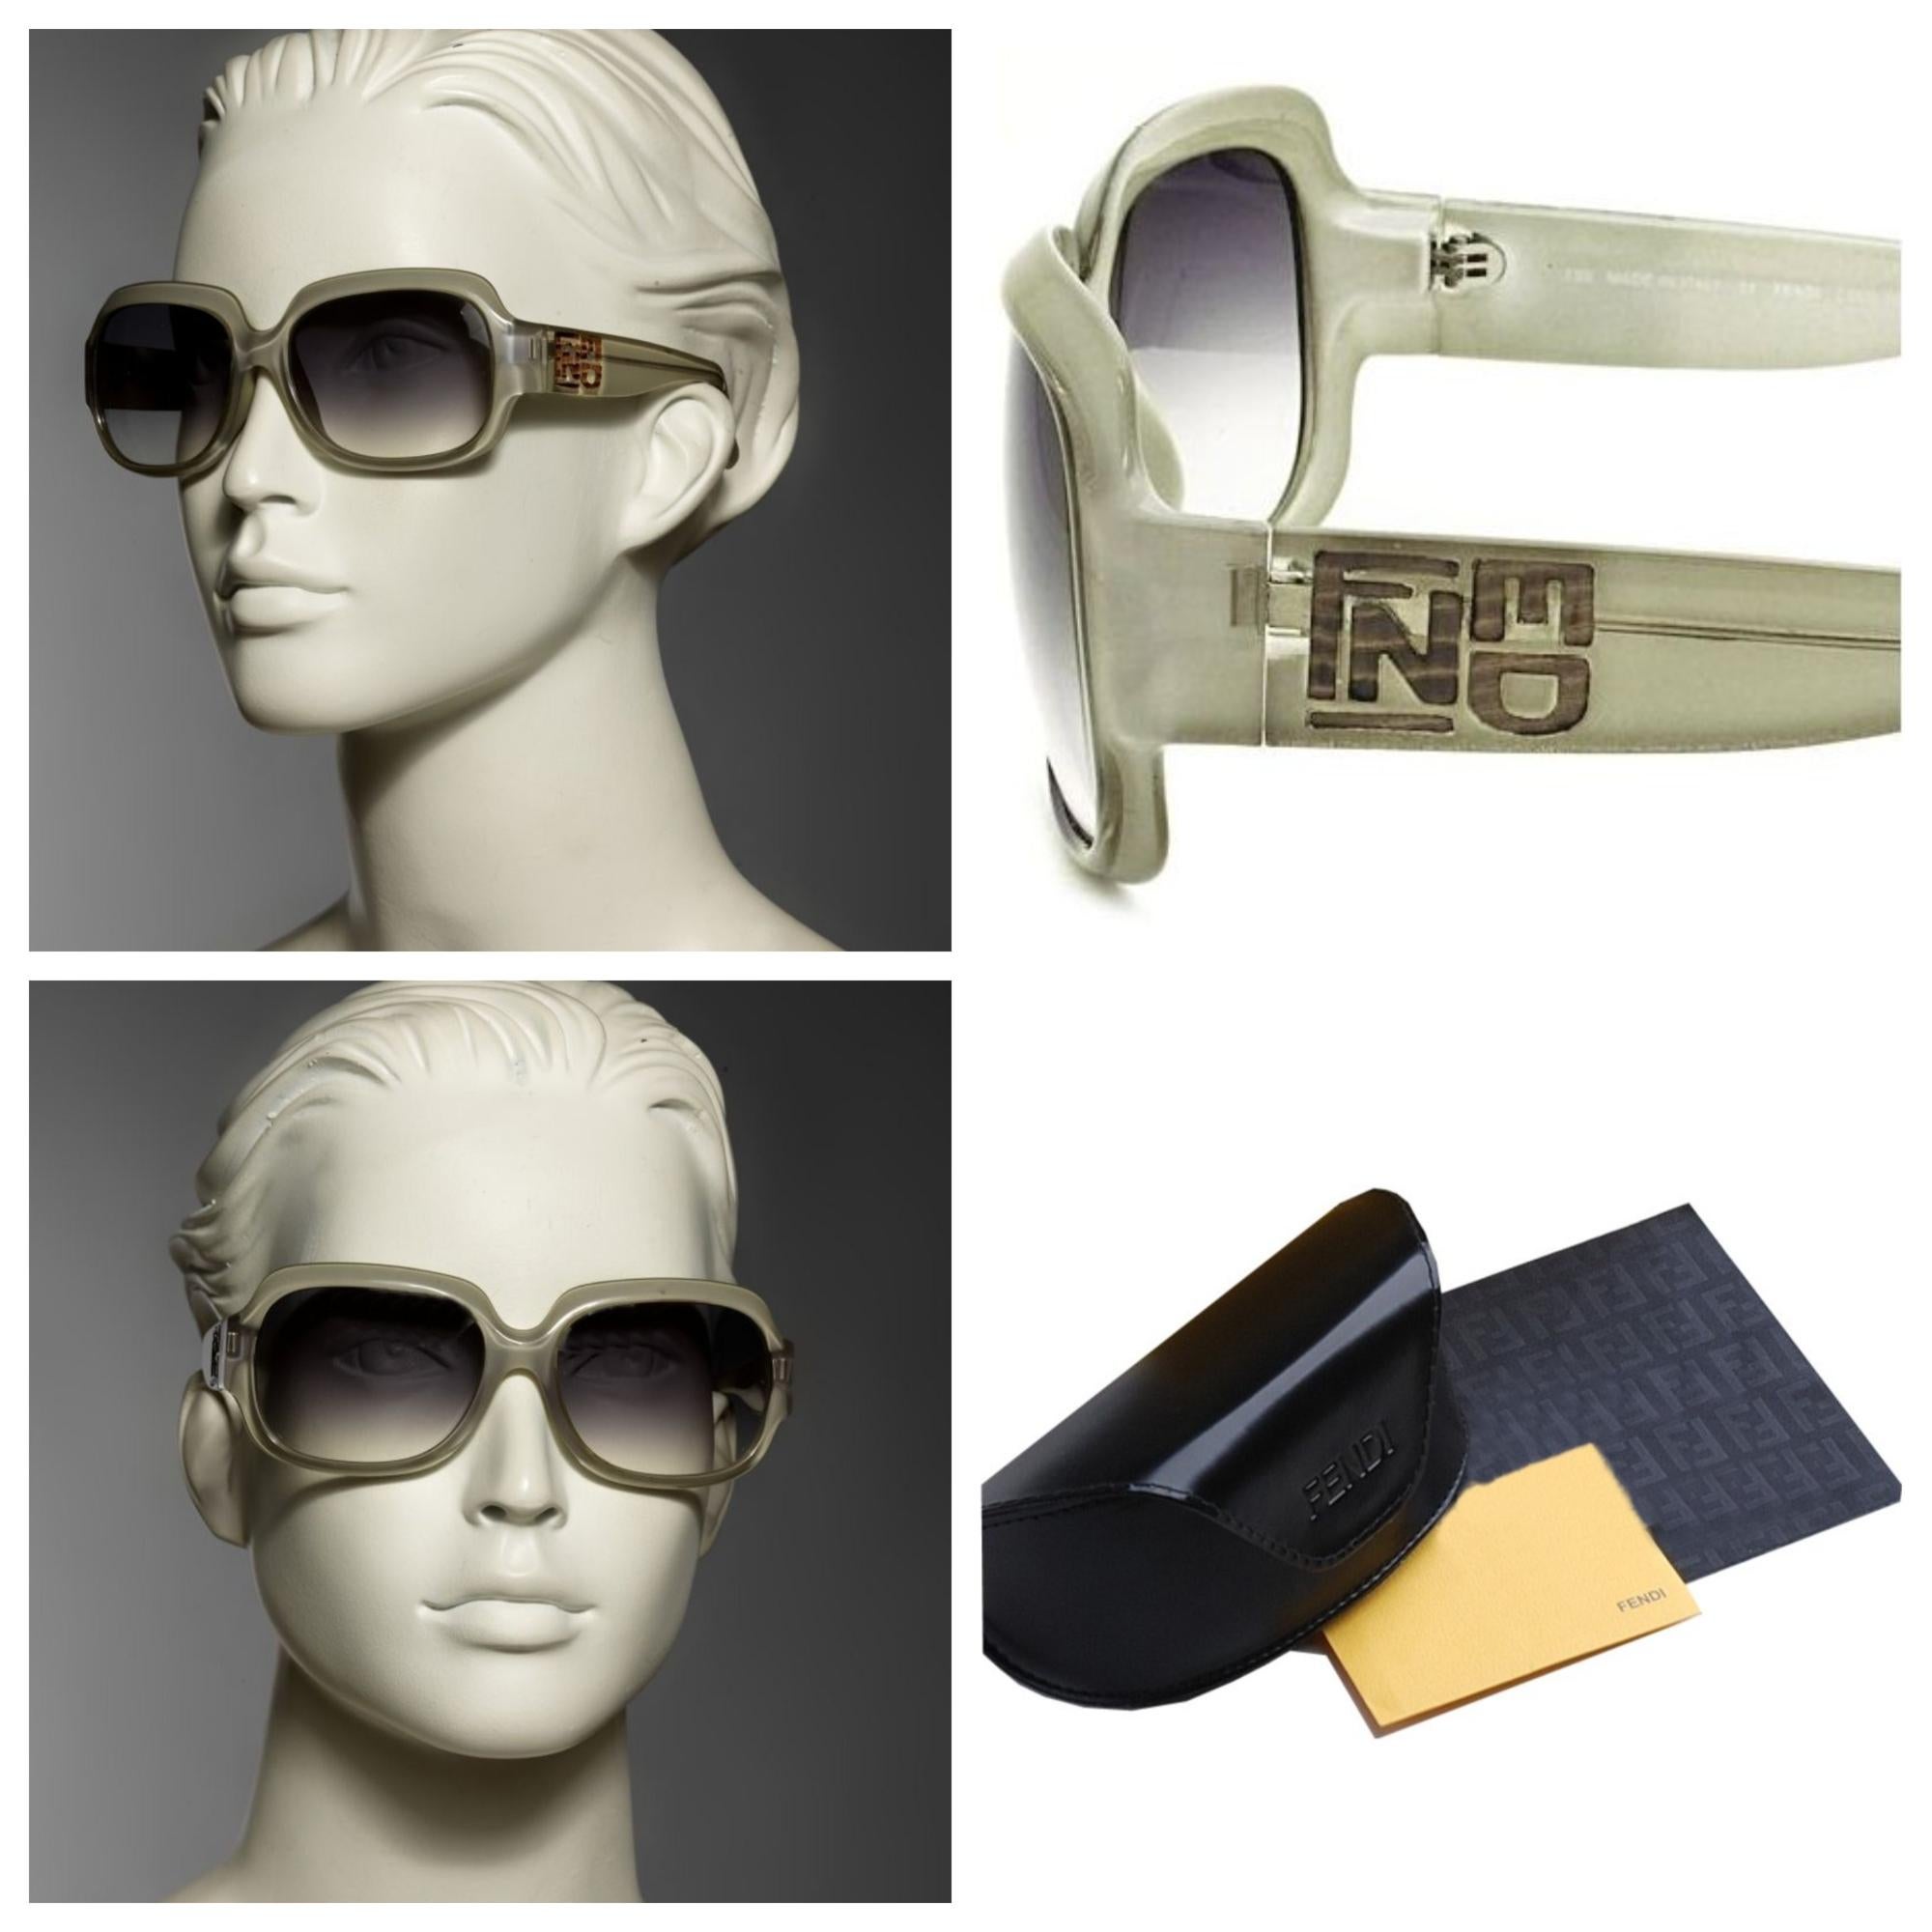 New Fendi Sunglasses with Case

Brand New
Beautiful Sage Gray 
Wood Inlaid FF Sides
Lightweight Scratch and Impact Resistant
Made in Italy
100% UVA/UVB Protection
Comes with Case & Cleaning Clothing